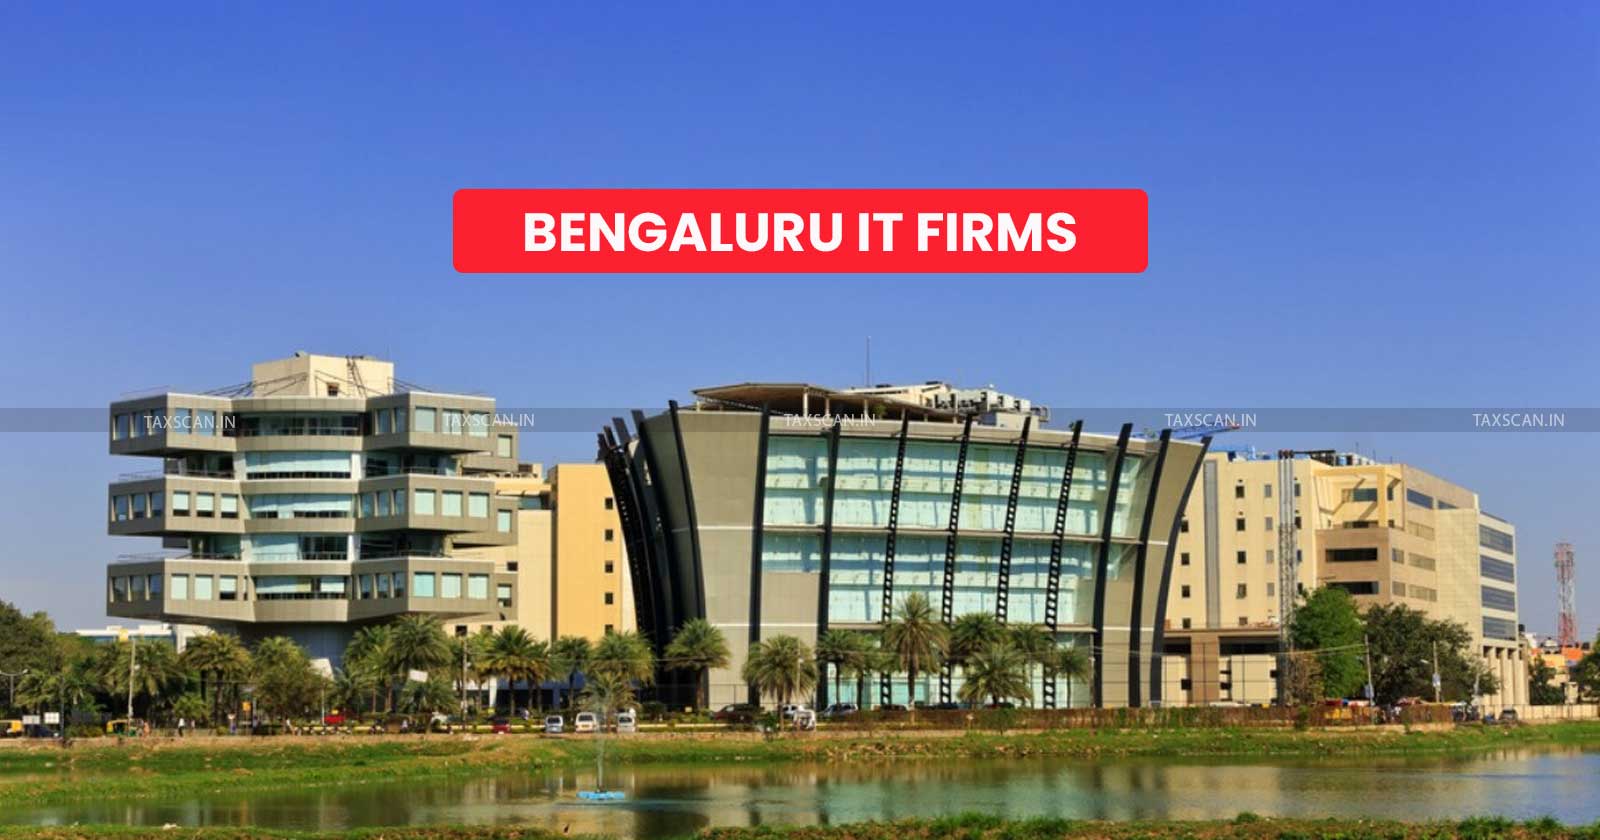 Bengaluru - IT Giants - IT Giants Implement Drastic Measures - Global Recession Fears - Infosys - bangaluru it firms - taxscan